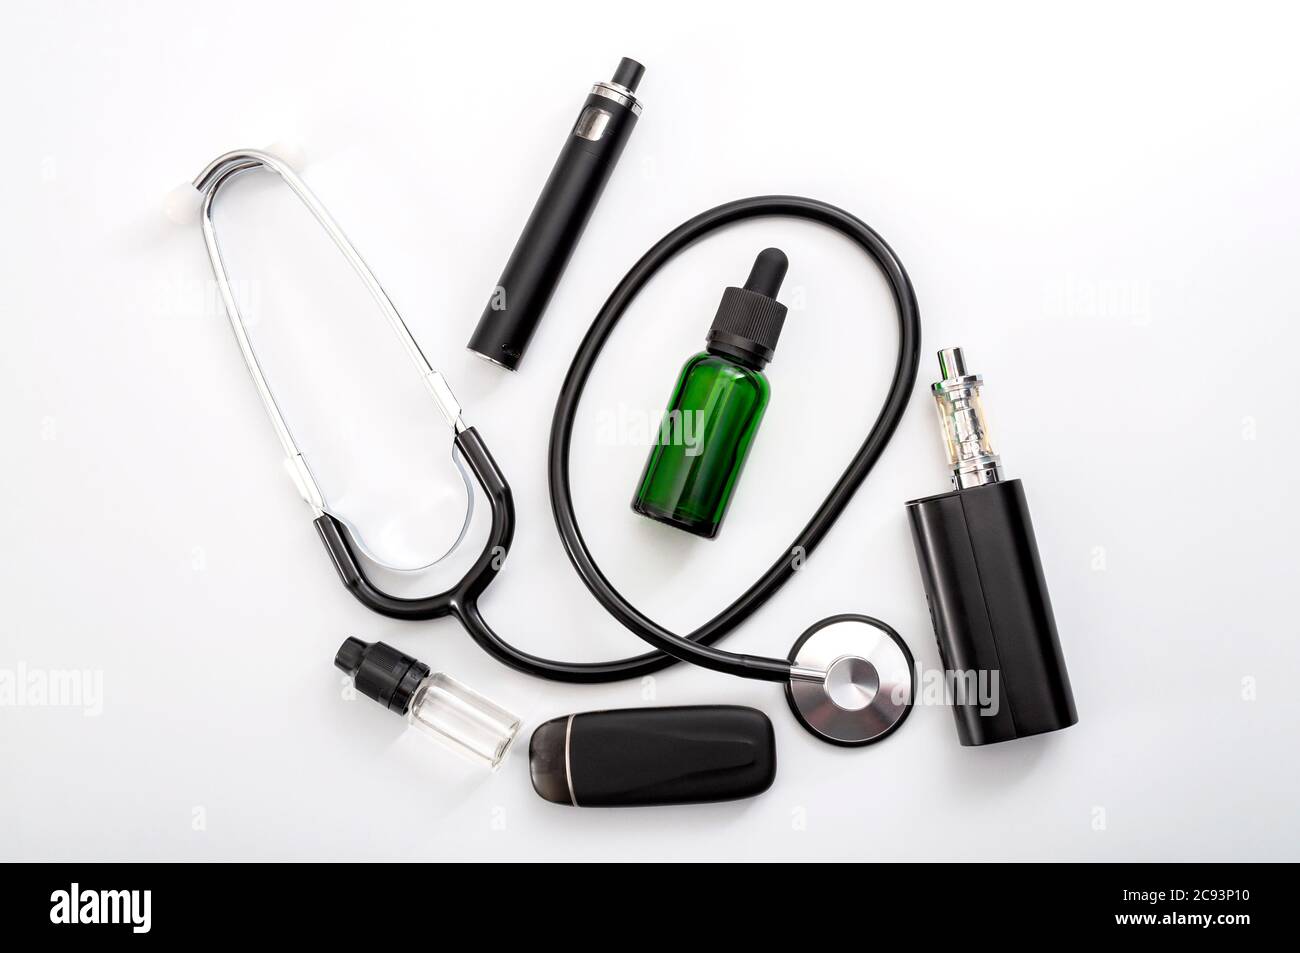 Help to stop smoking cigarettes and health risk linked to vaping concept with stethoscope, e cigarette, ejuice and vape pod isolated on white backgrou Stock Photo